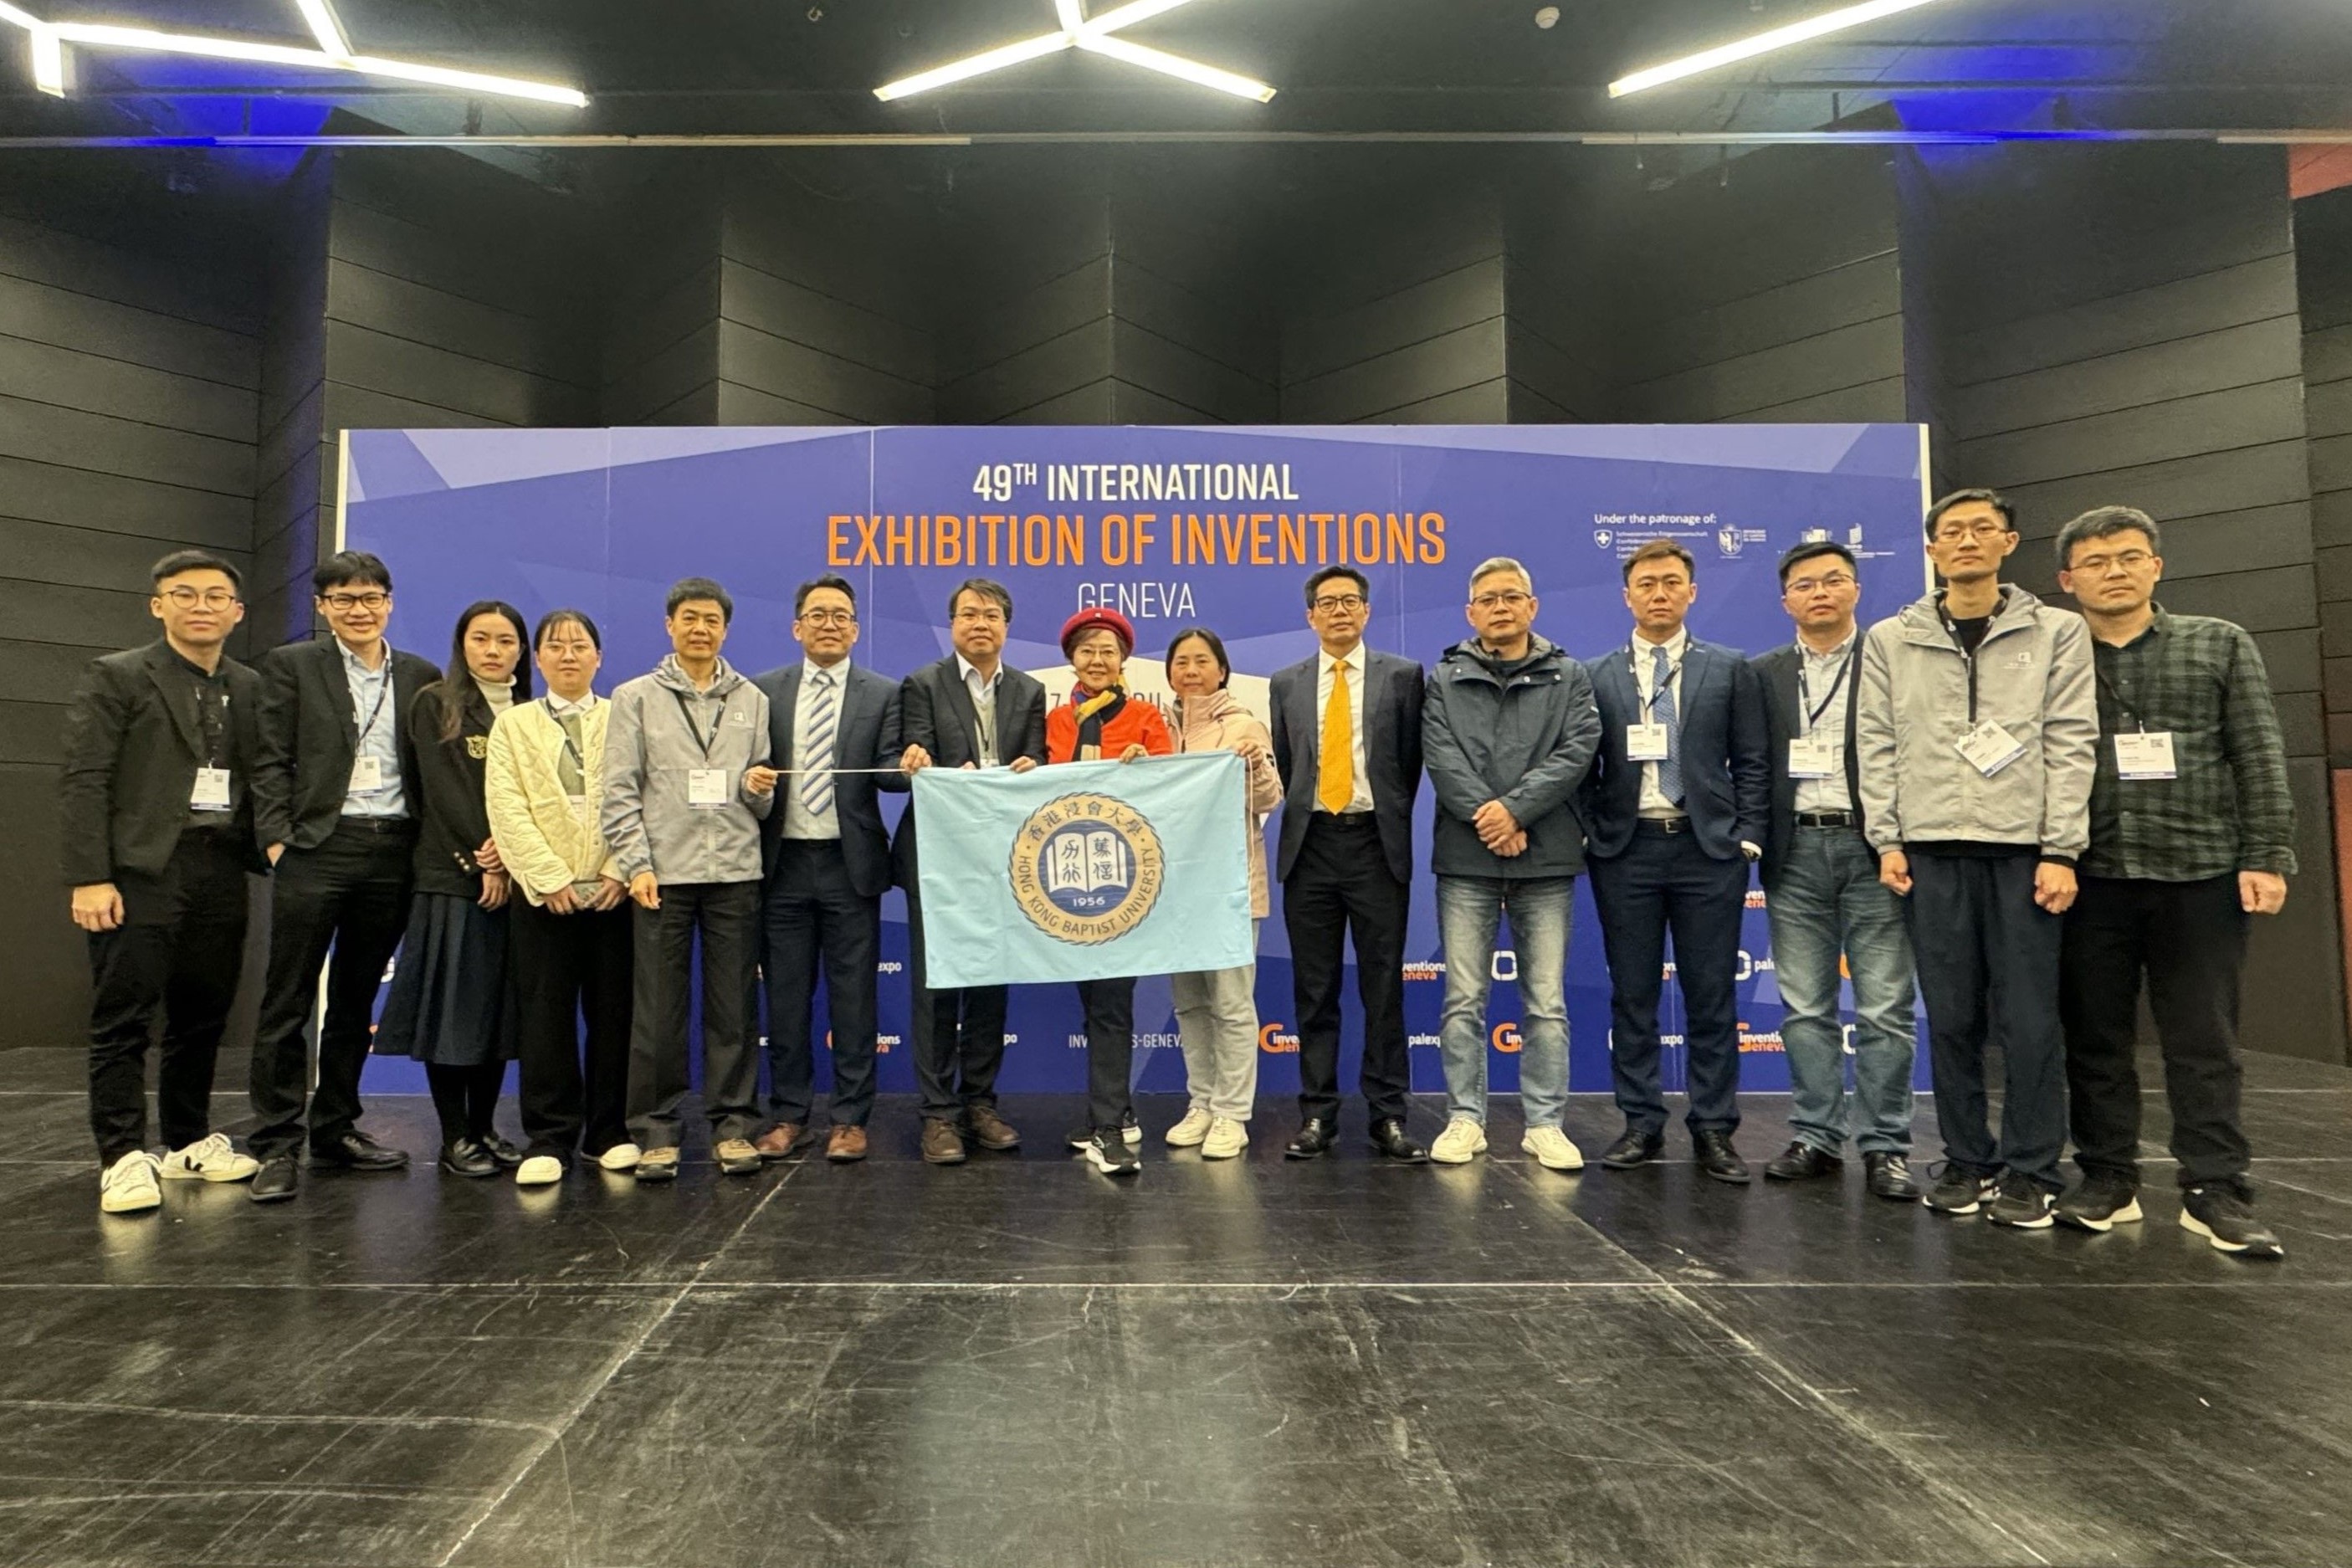 SCM scholars clinch five awards at Geneva International Exhibition of Inventions